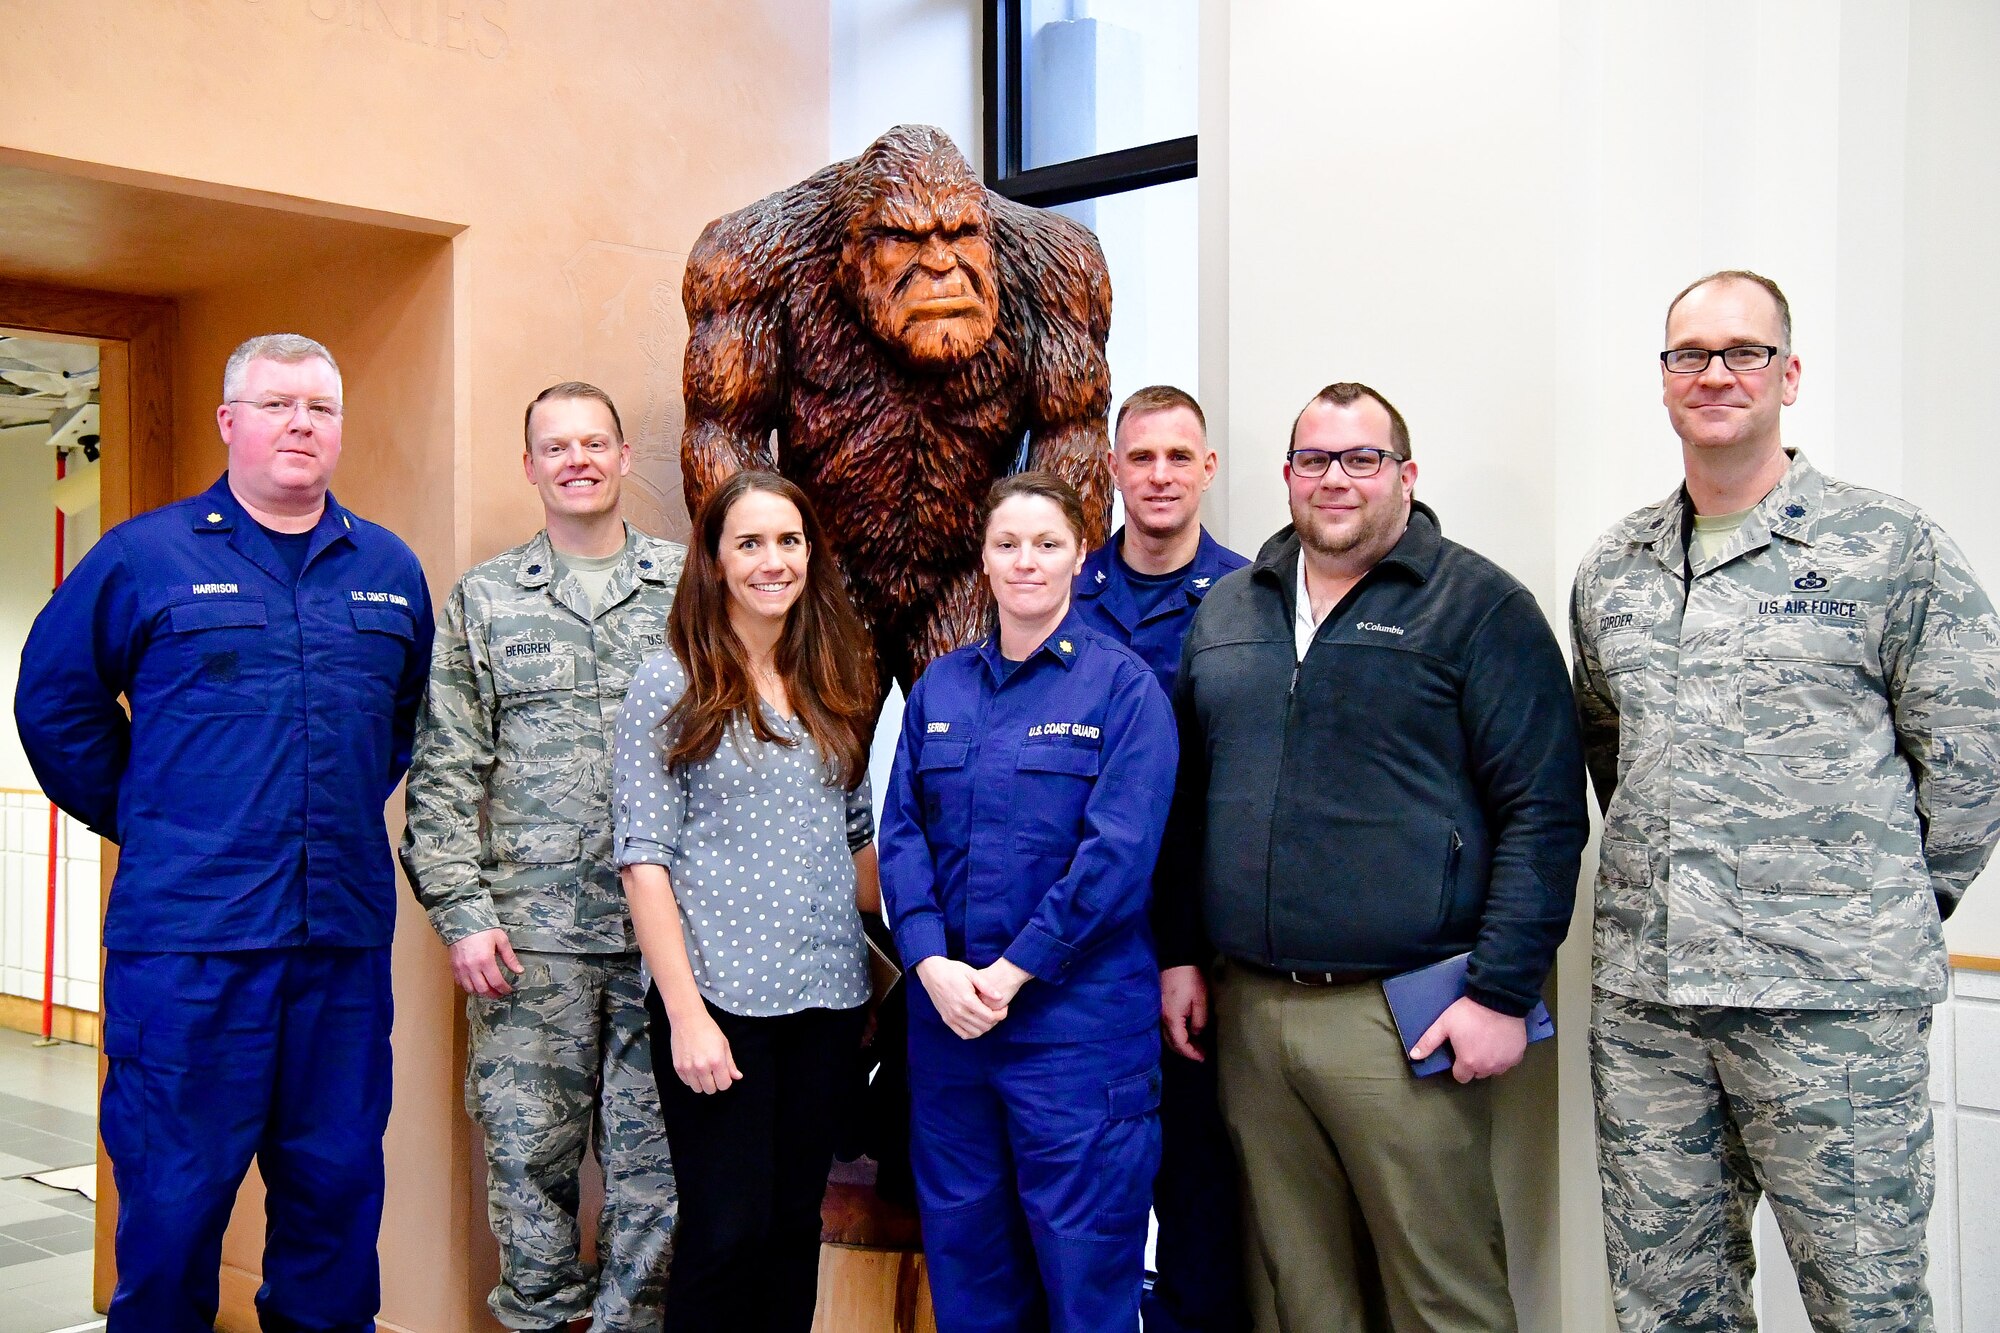 Members of the U.S. Coast Guard 13th District (Seattle) and the Western Air Defense Sector take a group photo in from of the WADS mascot, Bigfoot, after a morning of search and rescue cross-talk.  Pictured from left to right are: U.S. Coast Guard Lt. Cmdr. Courtney Harrison, U.S. Air Force Lt. Col. Brian Bergren, U.S. Coast Guard SAR expert Morgan Mak, U.S. Coast Guard Lt. Cmdr. Brook Serbu, U.S. Coast Guard Capt. Sean Cross, , U.S. Coast Guard SAR expert Scott Giard, and U.S. Air Force Lt. Col. Eric Corder.